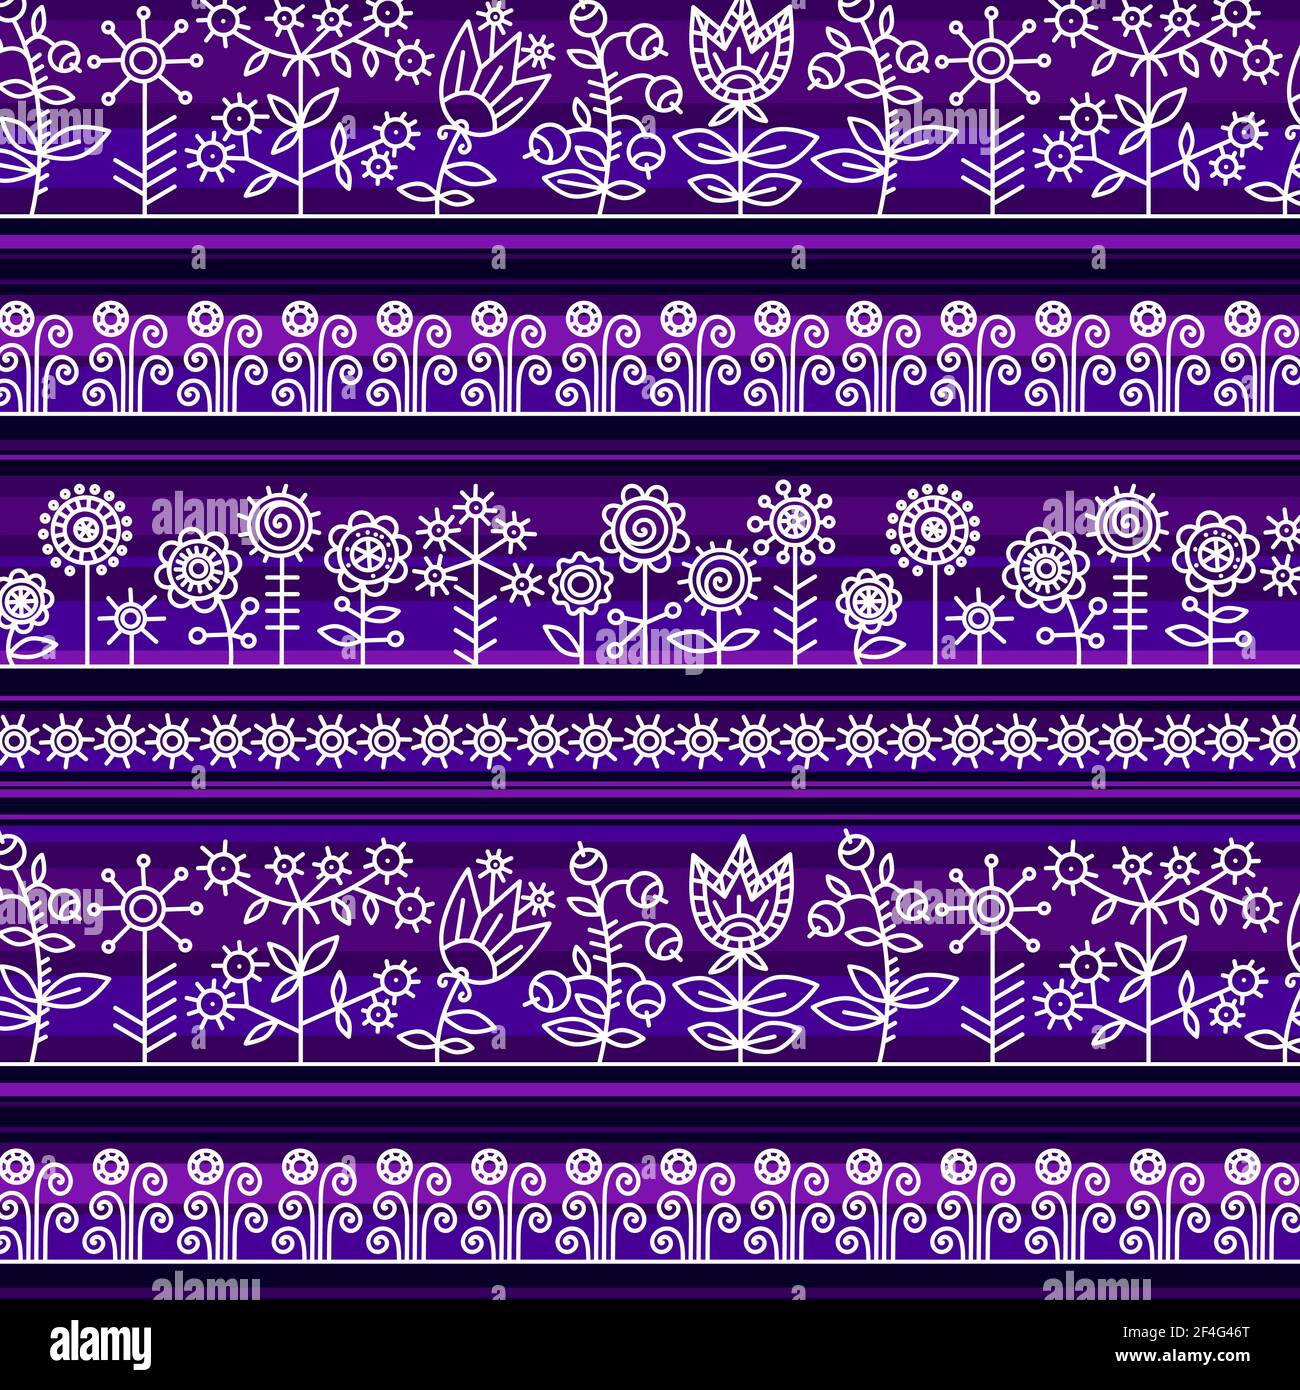 Seamless background with white flowers and berries on purple stripes. Stock Vector